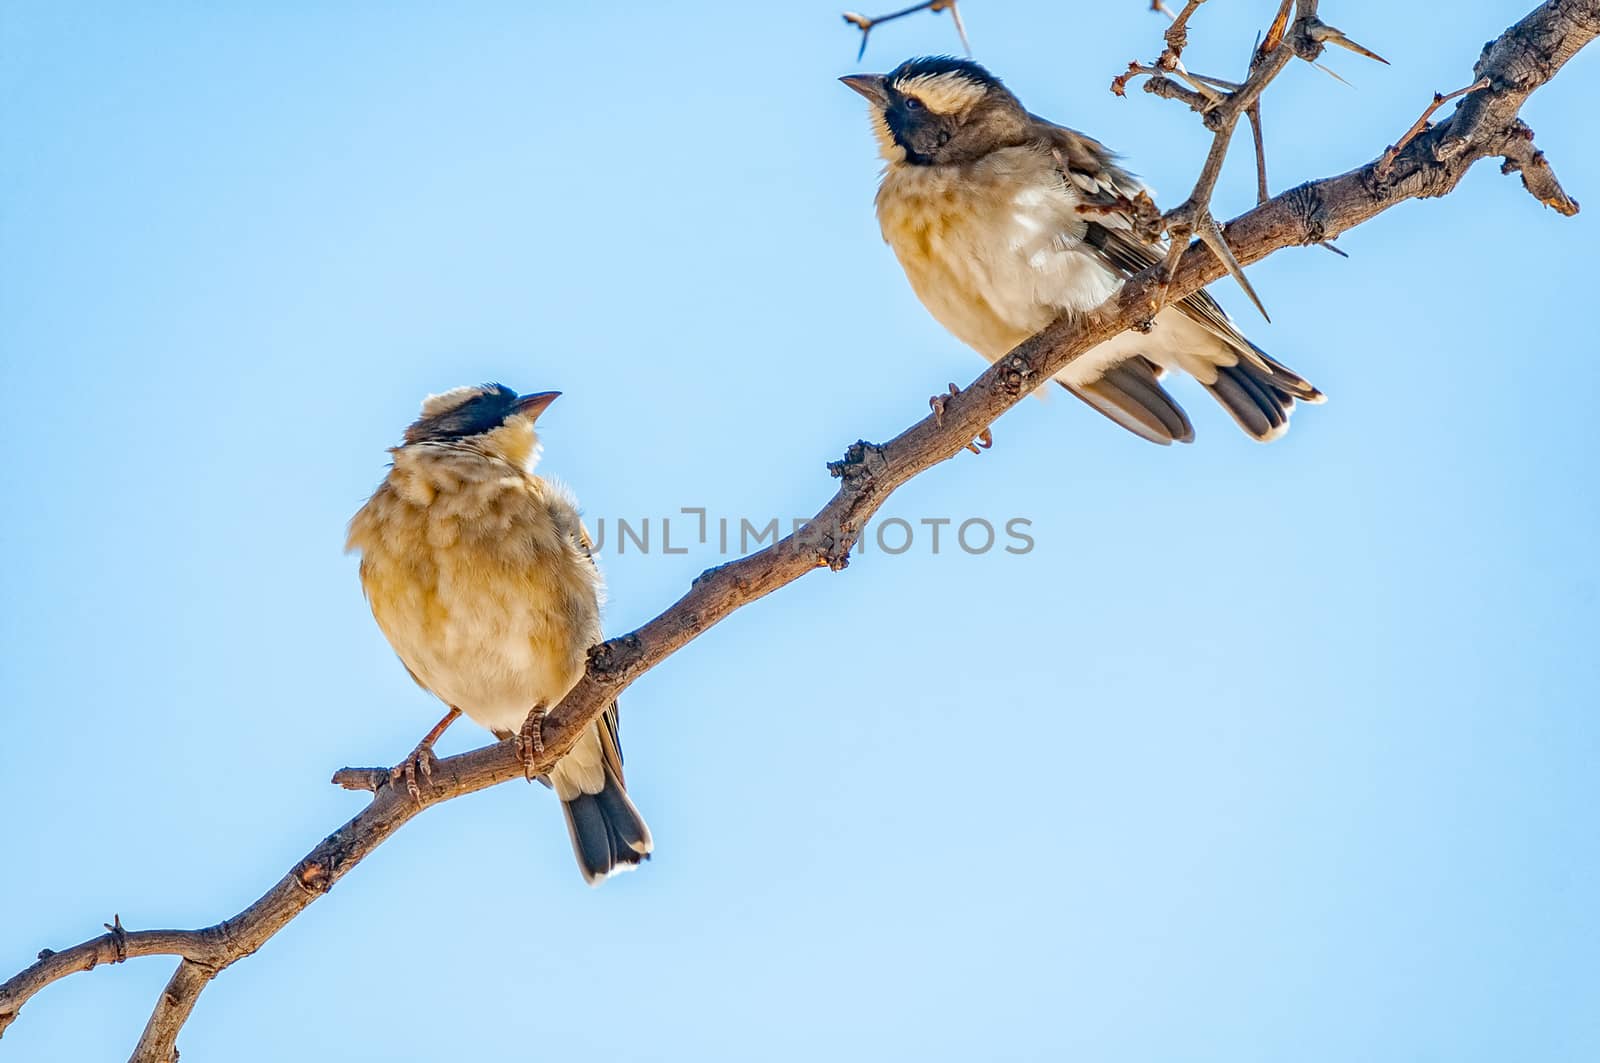 Two white-browed sparrow-weavers, Plocepasser mahali, on a dead tree branch in the arid Kgalagadi